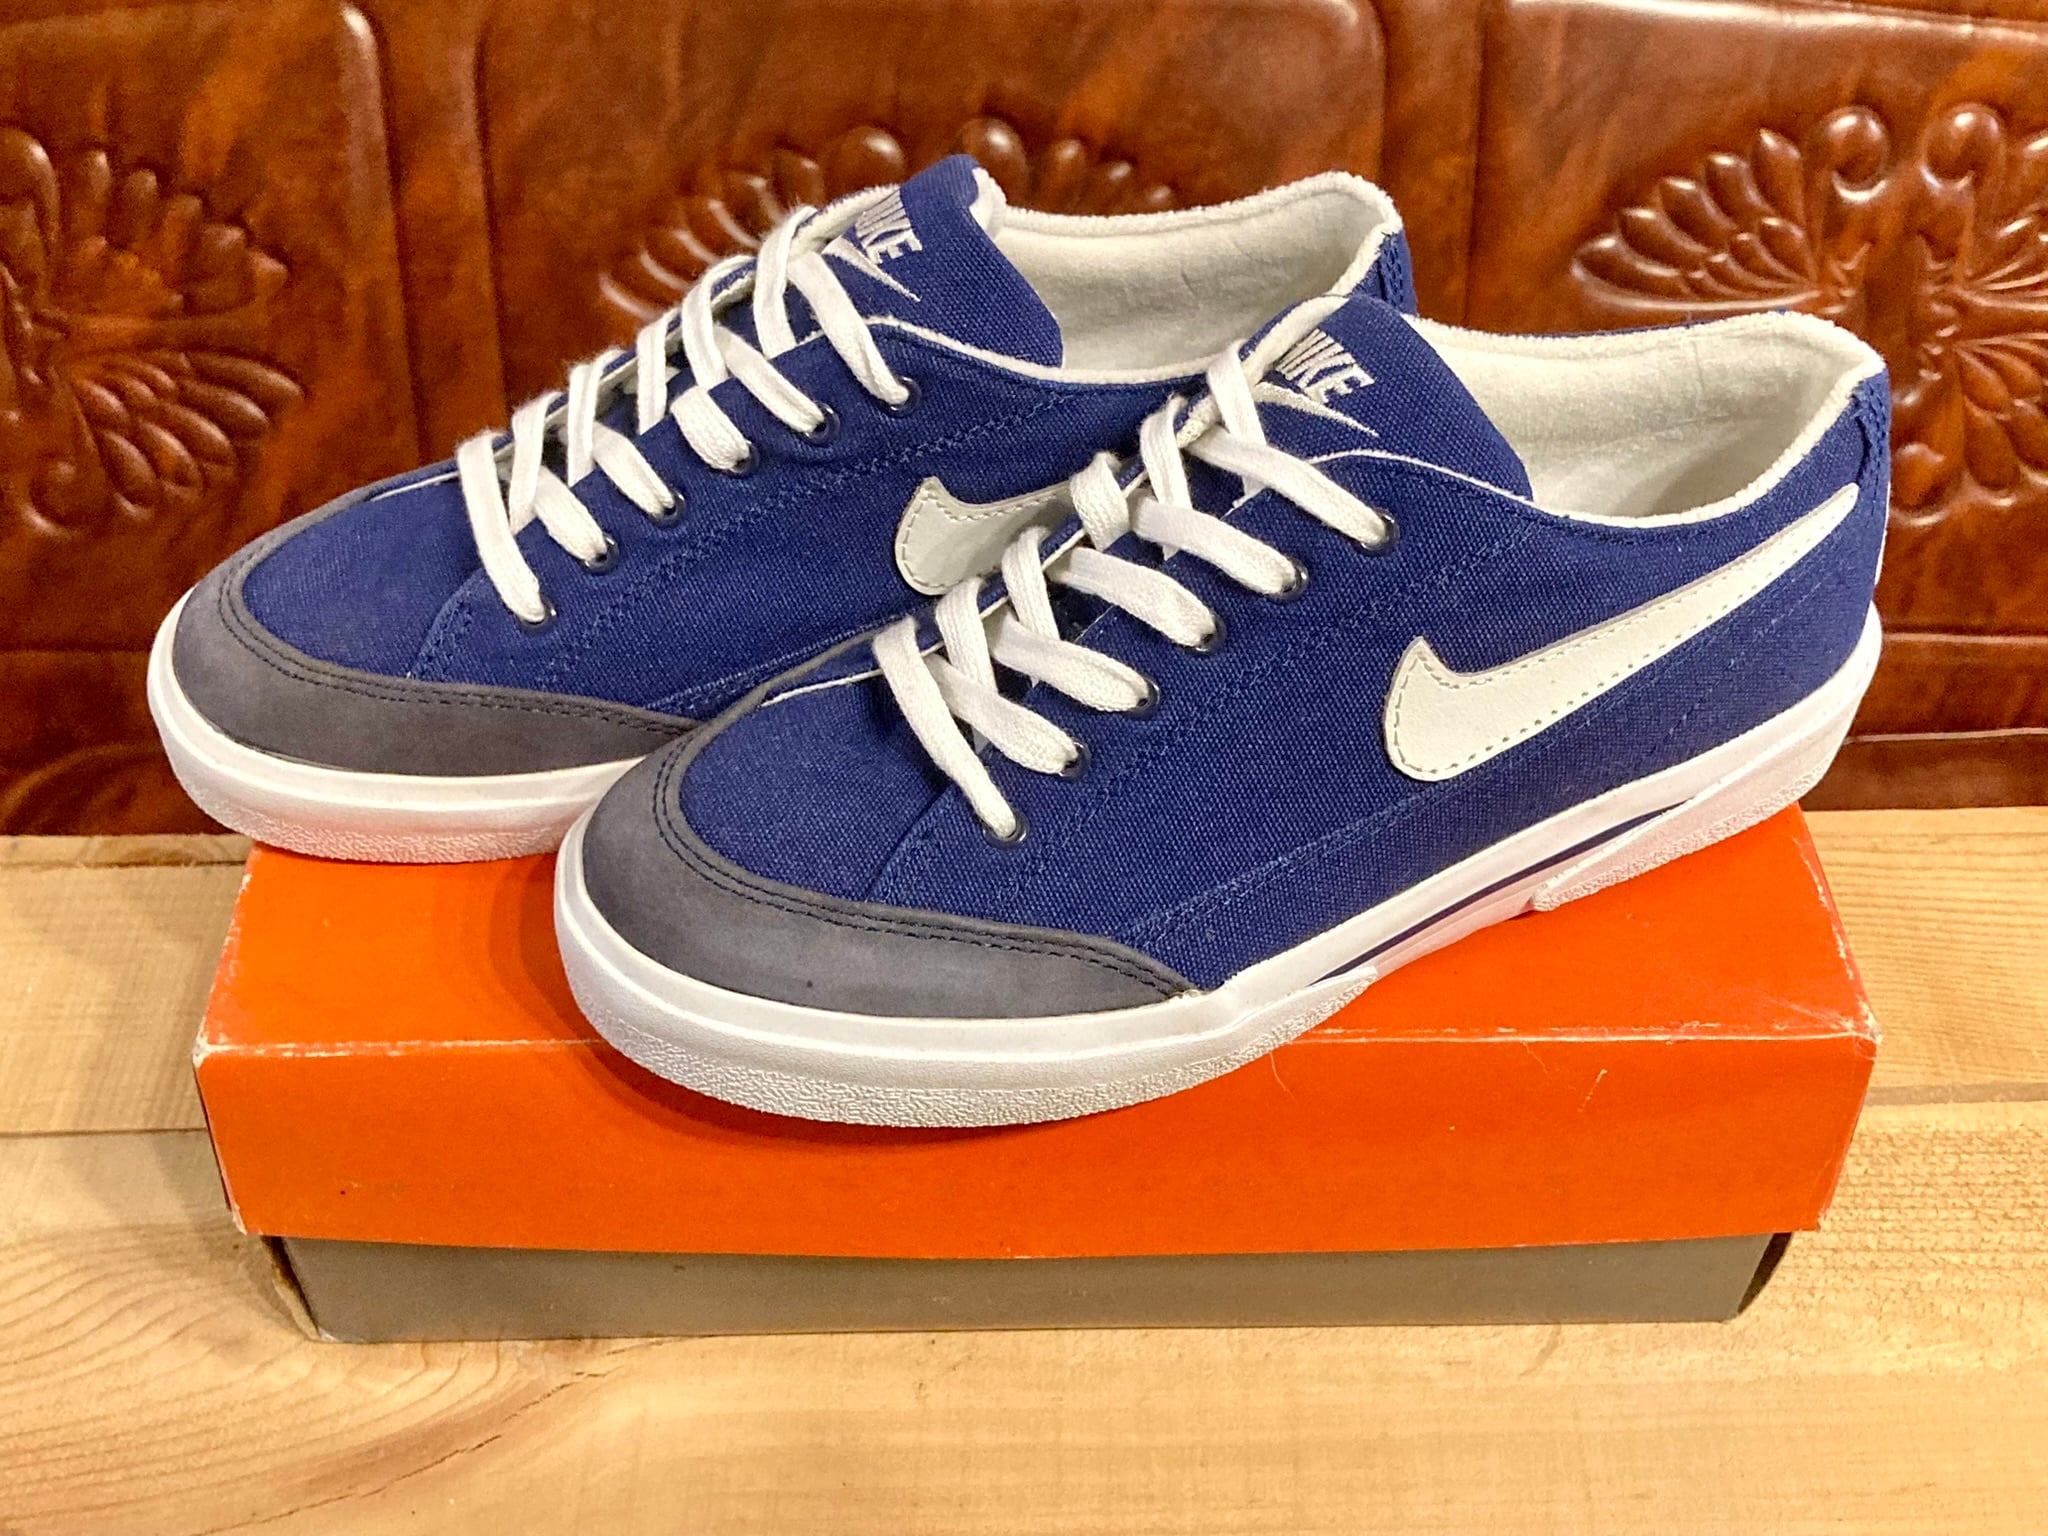 NIKE（ナイキ）COURT BISCUIT SUEDE（コートビスケット）6 23cm